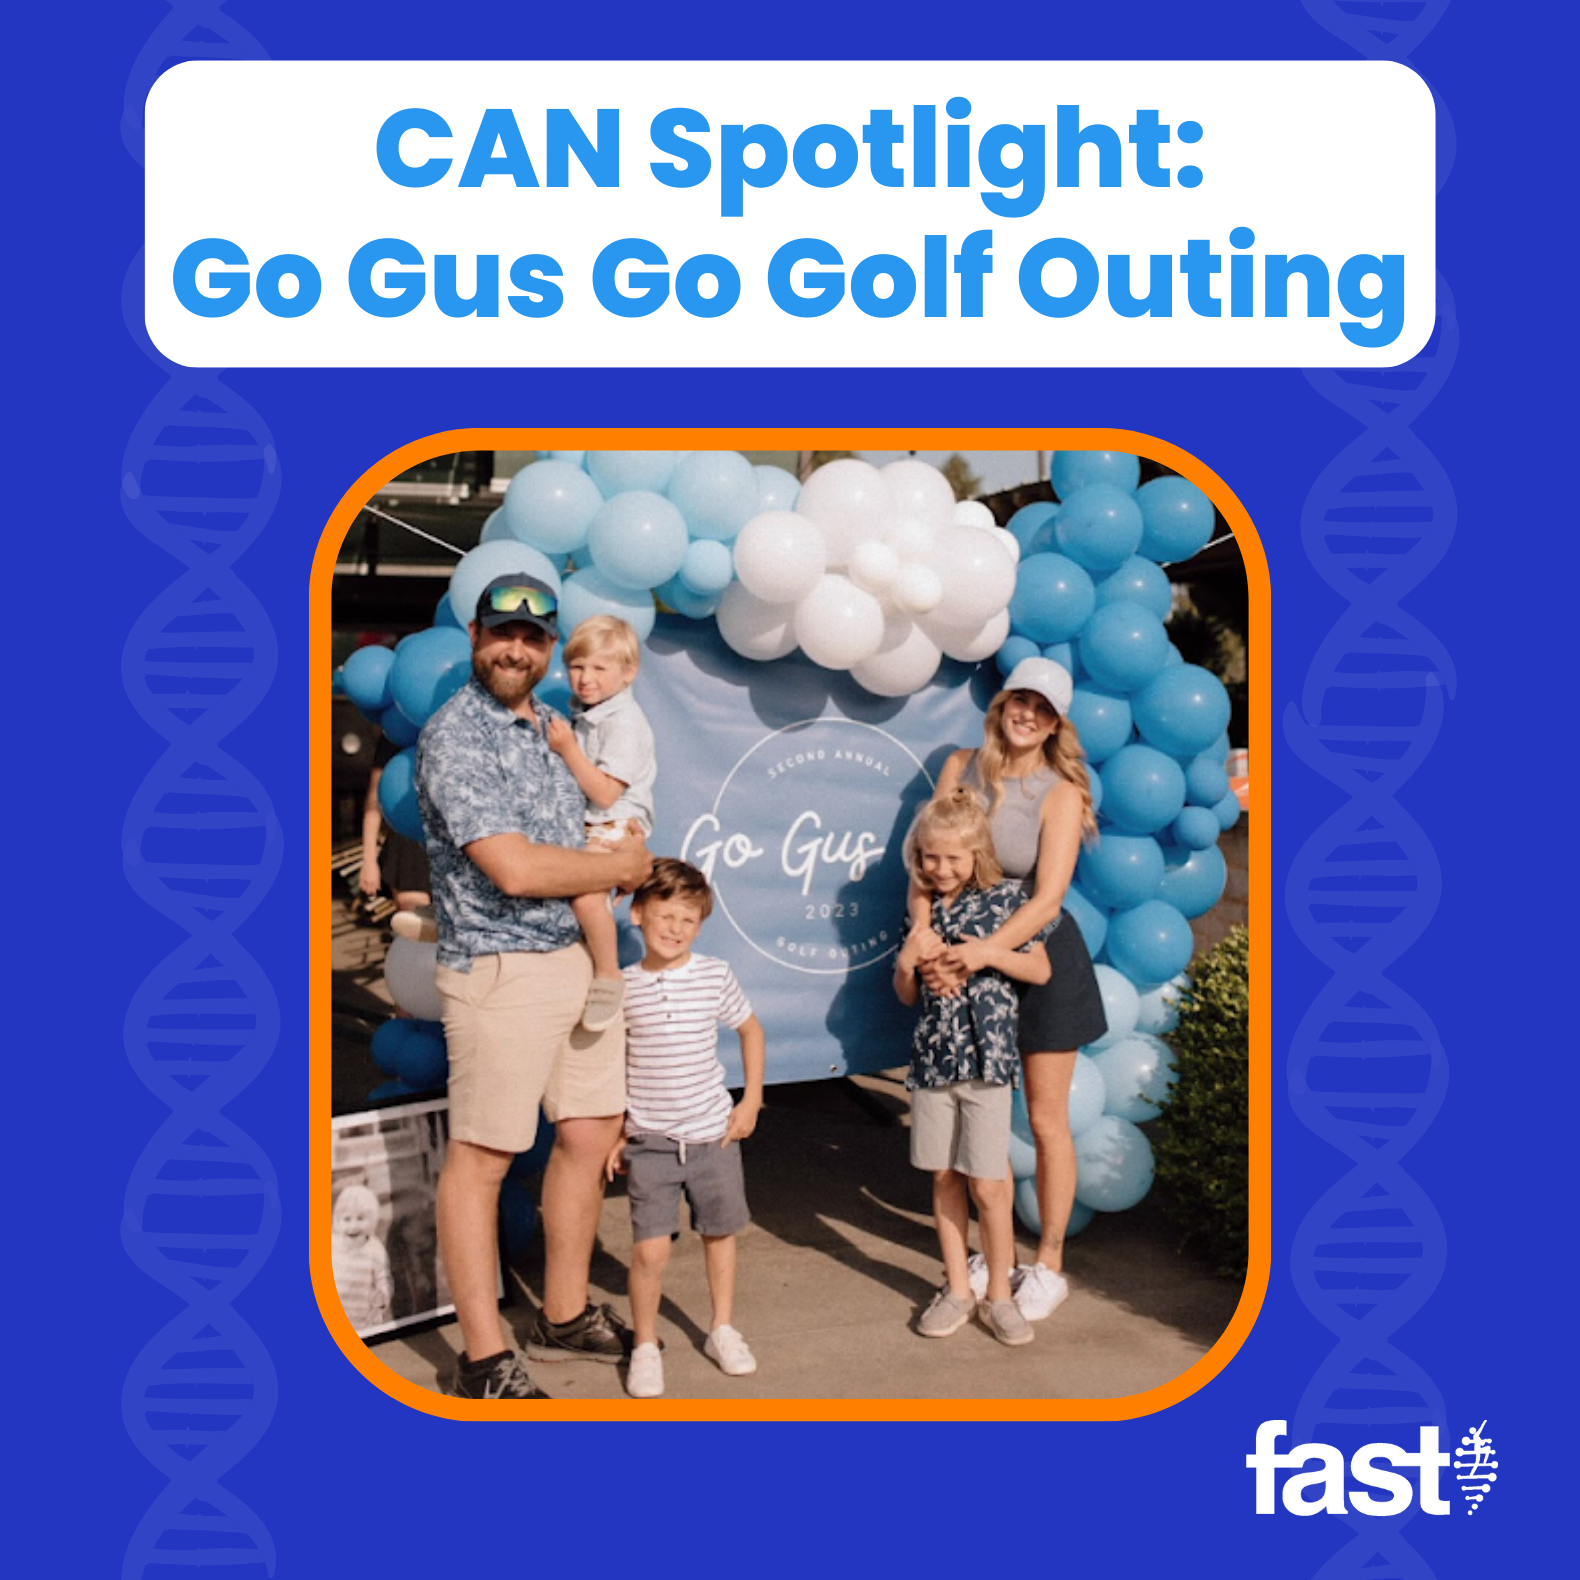 CAN Spotlight: Go Gus Go Golf Outing, with a photo of the Laskowski family posing at the event